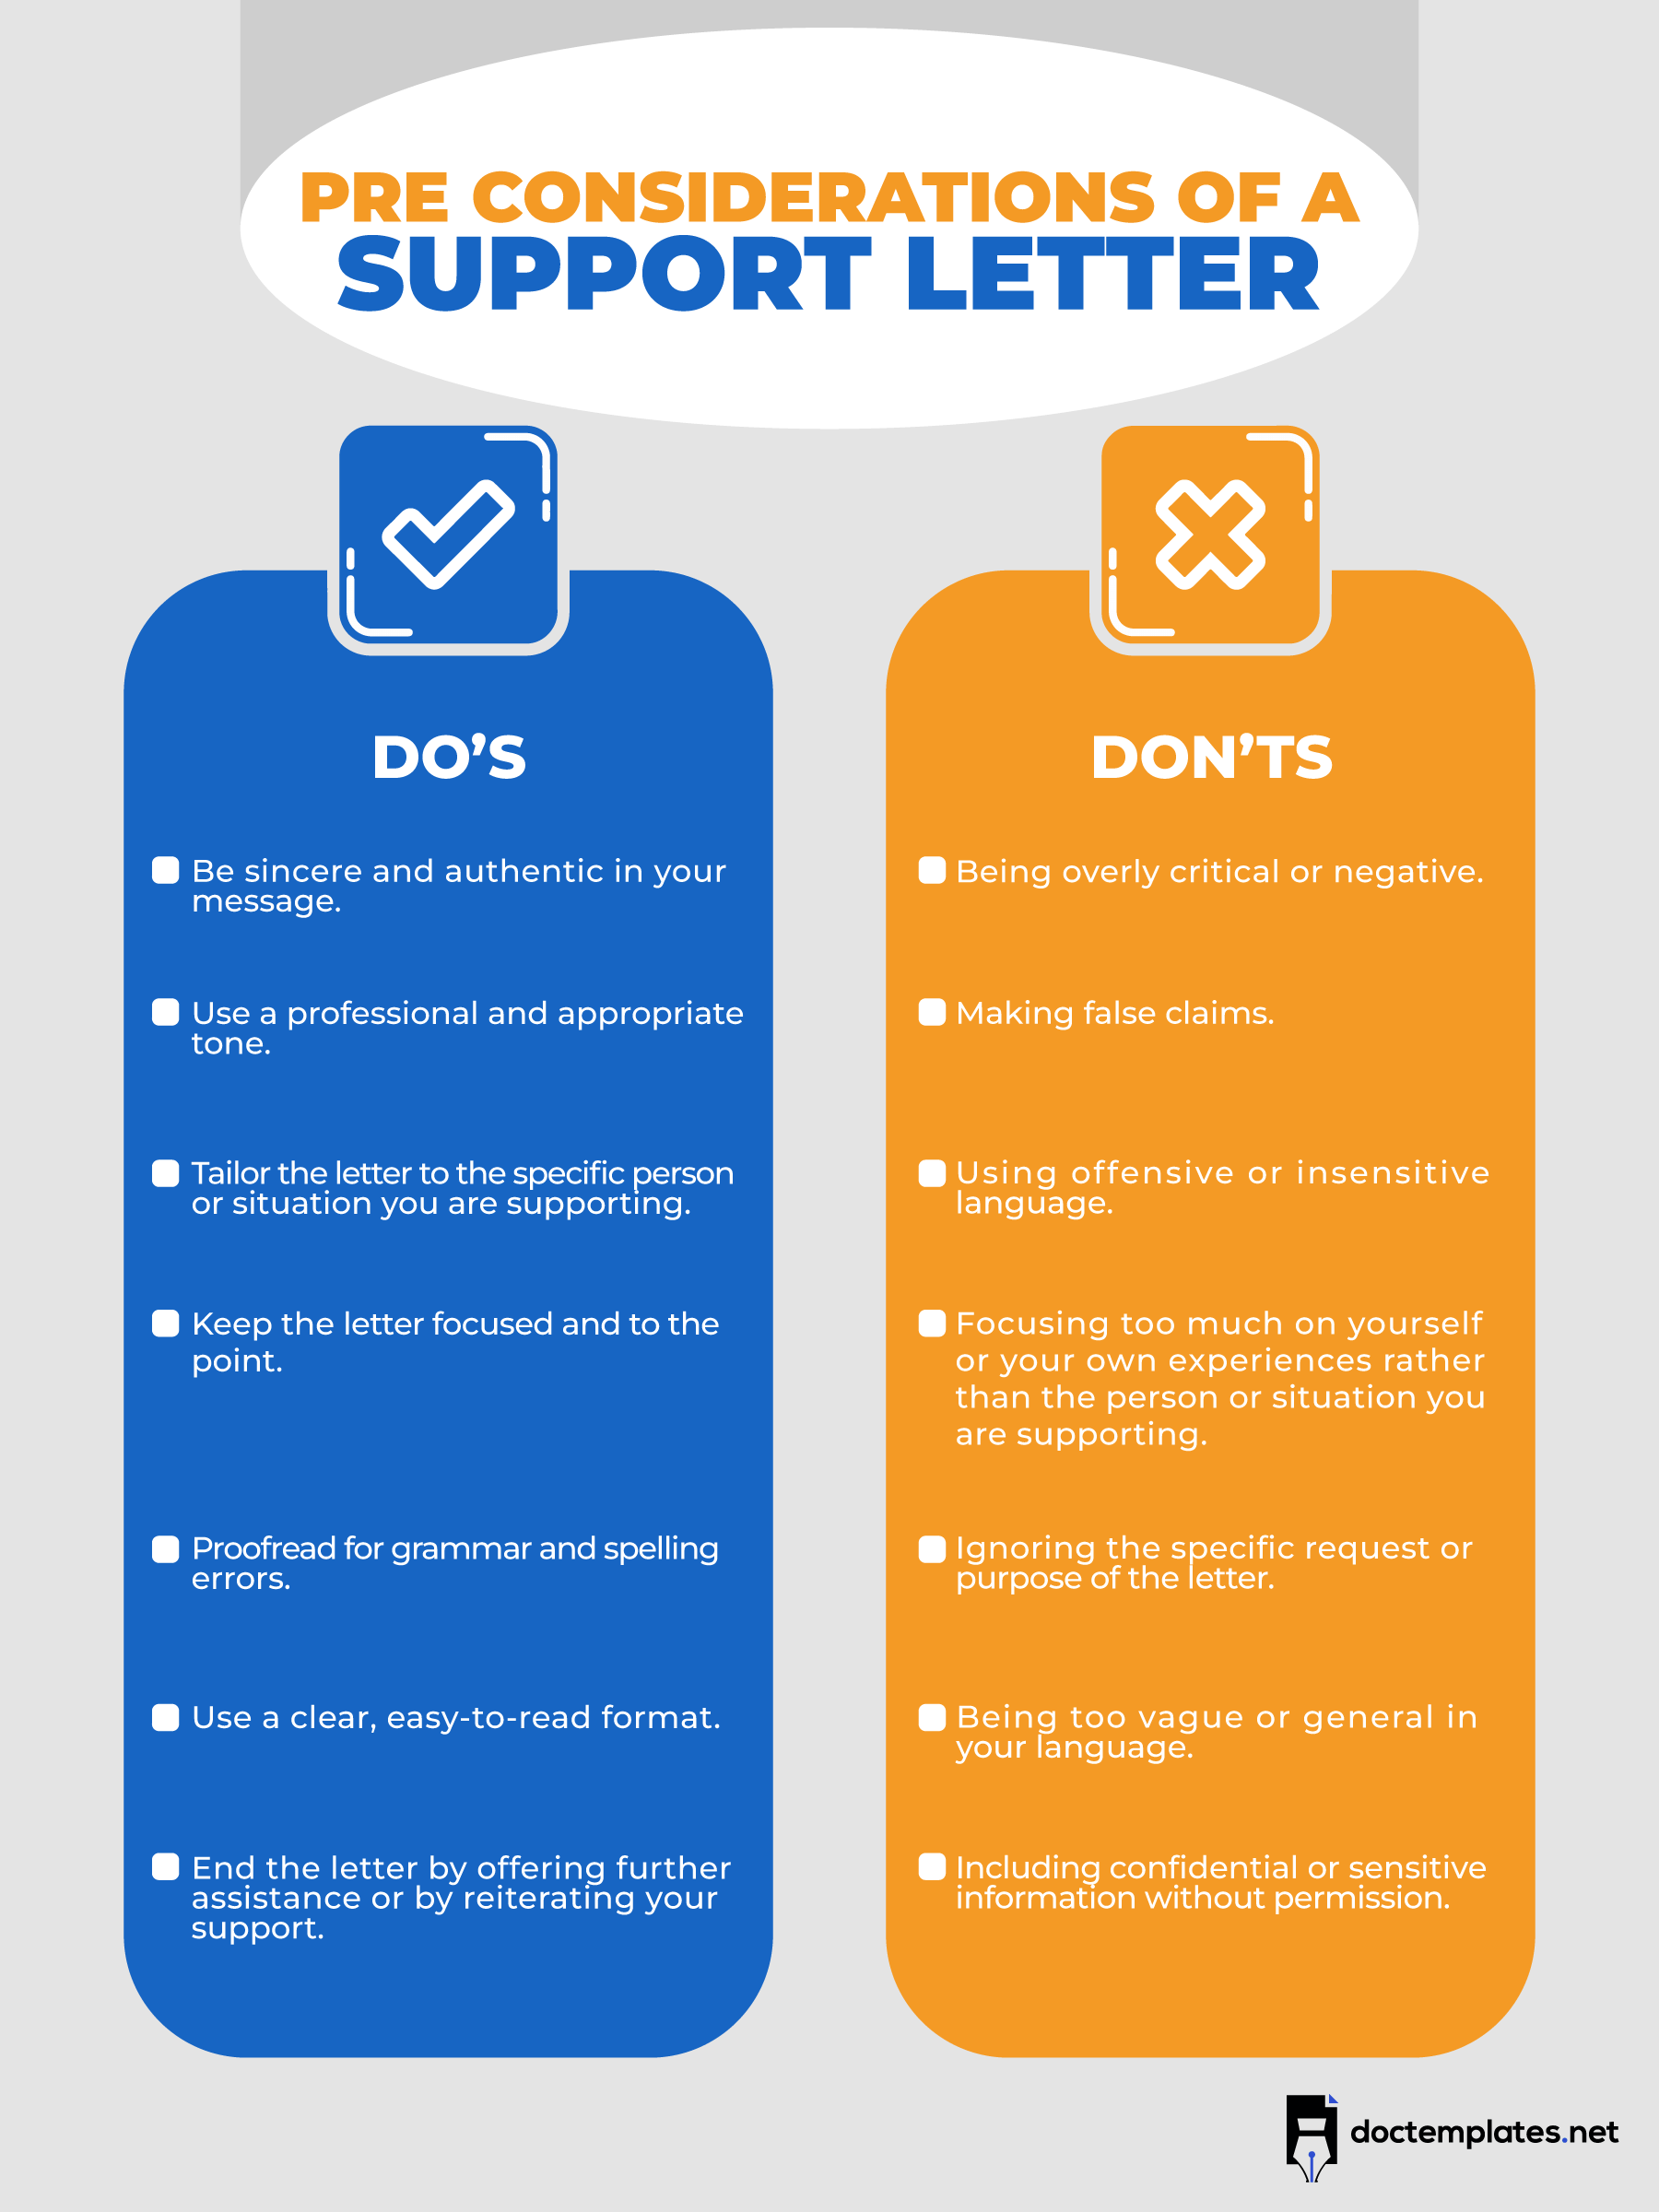 This infographic is about support letter pre-considerations.